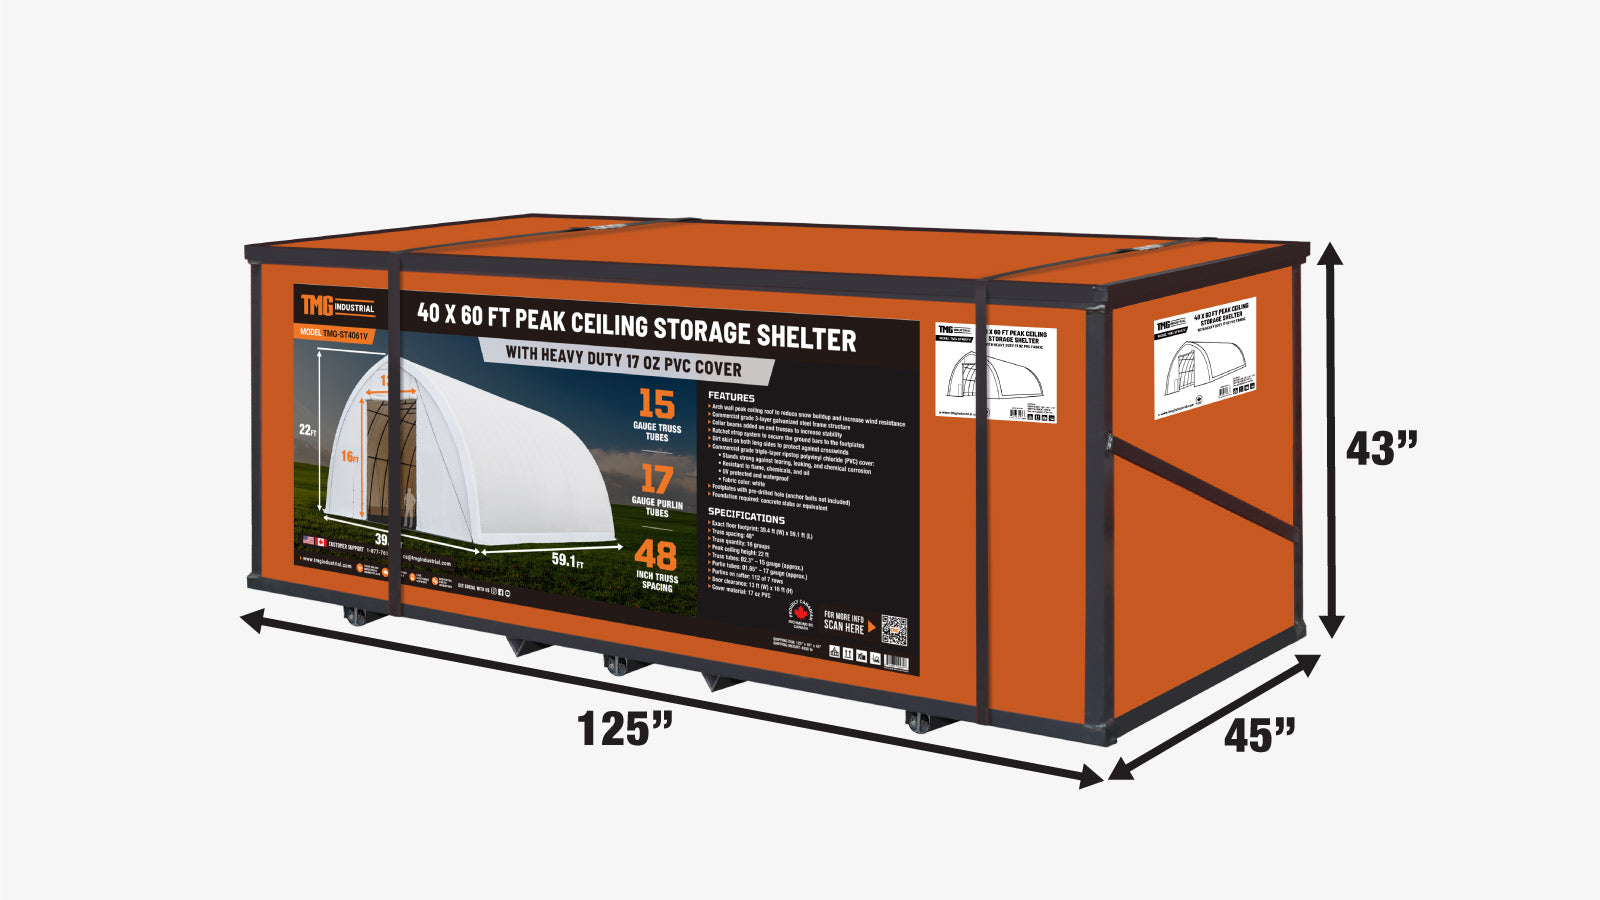 TMG-ST4061V 40' x 60' Peak Ceiling Storage Shelter, Single Truss, 17oz Commercial Grade PVC Cover, 13' W x 16' H Wide Open Door on Two End Walls-shipping-info-image